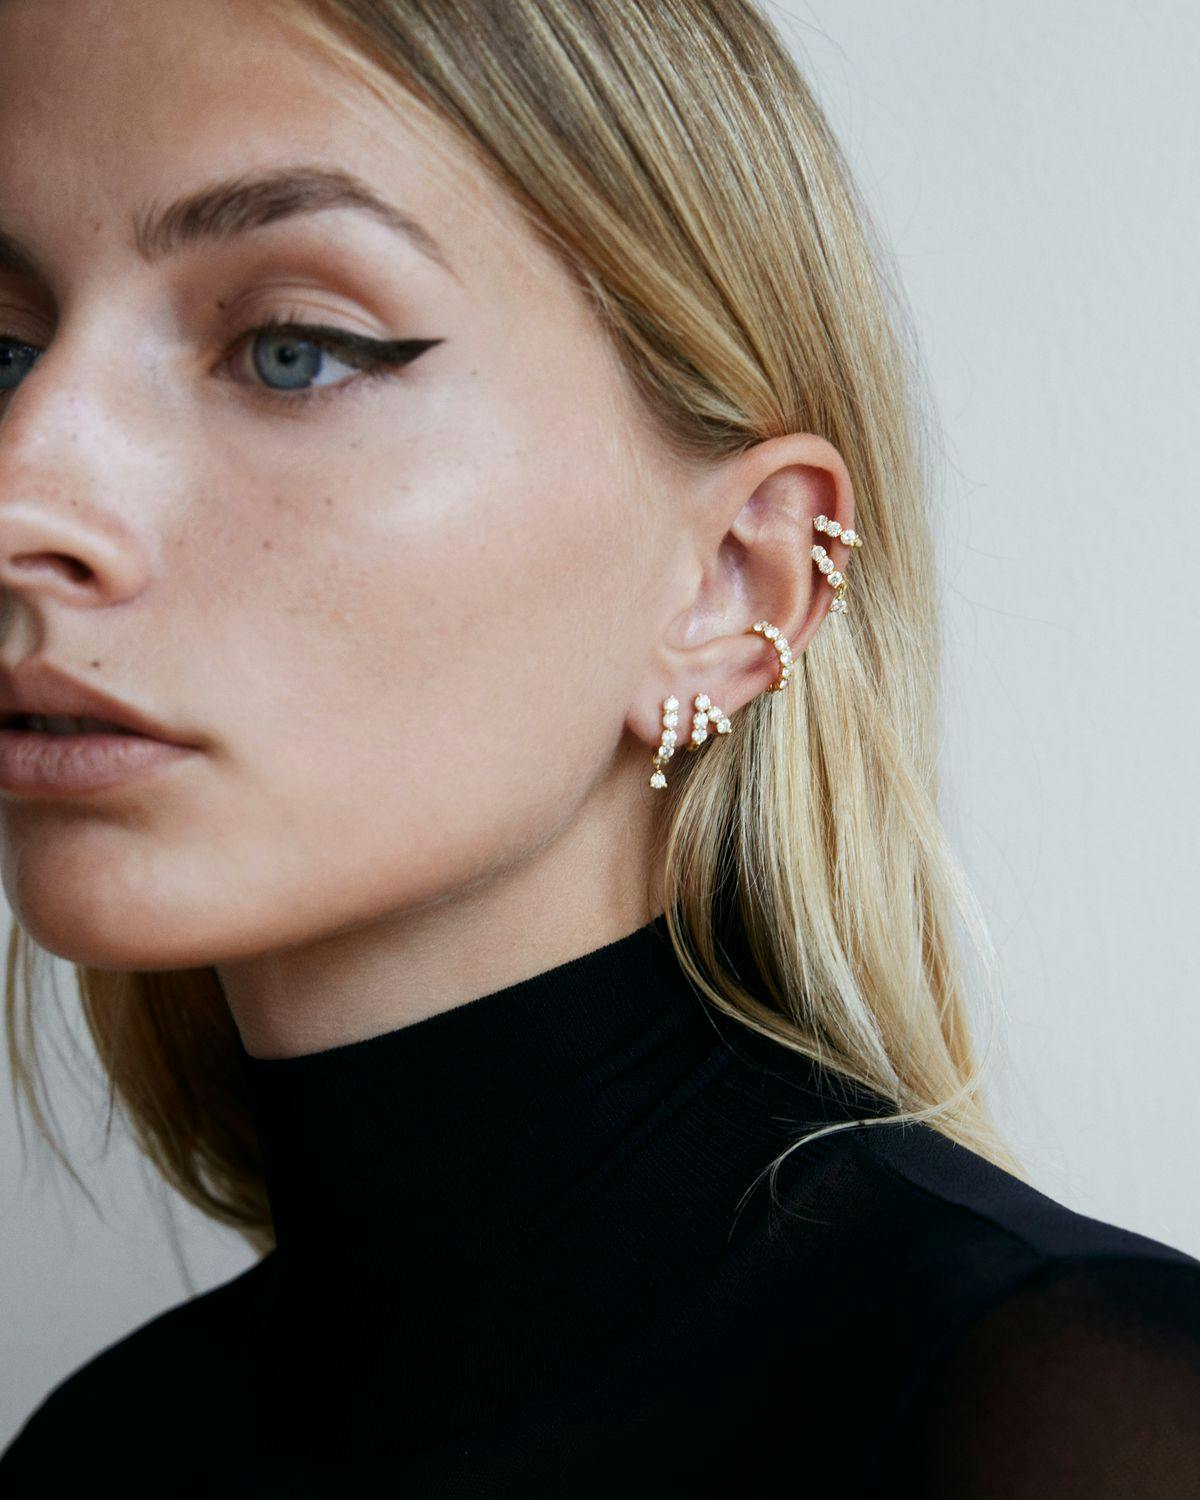 Close up of model looking past camera wearing multiple diamond earrings and earring Huggies on a single ear. 